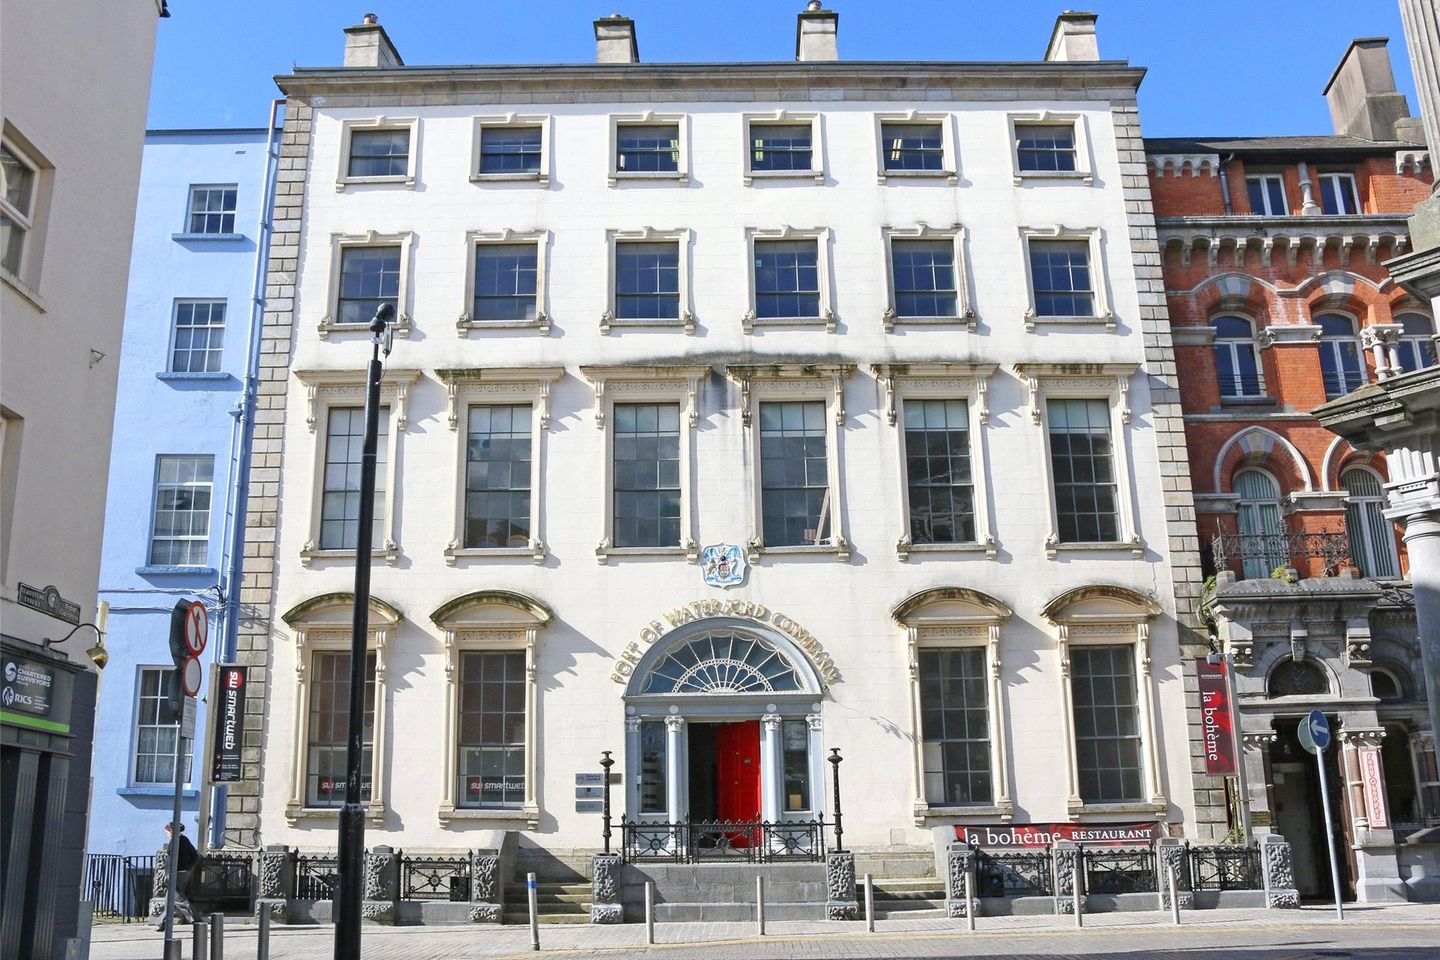 The Port Of Waterford Building, 2 Georges St, Waterford, Waterford City, Co. Waterford